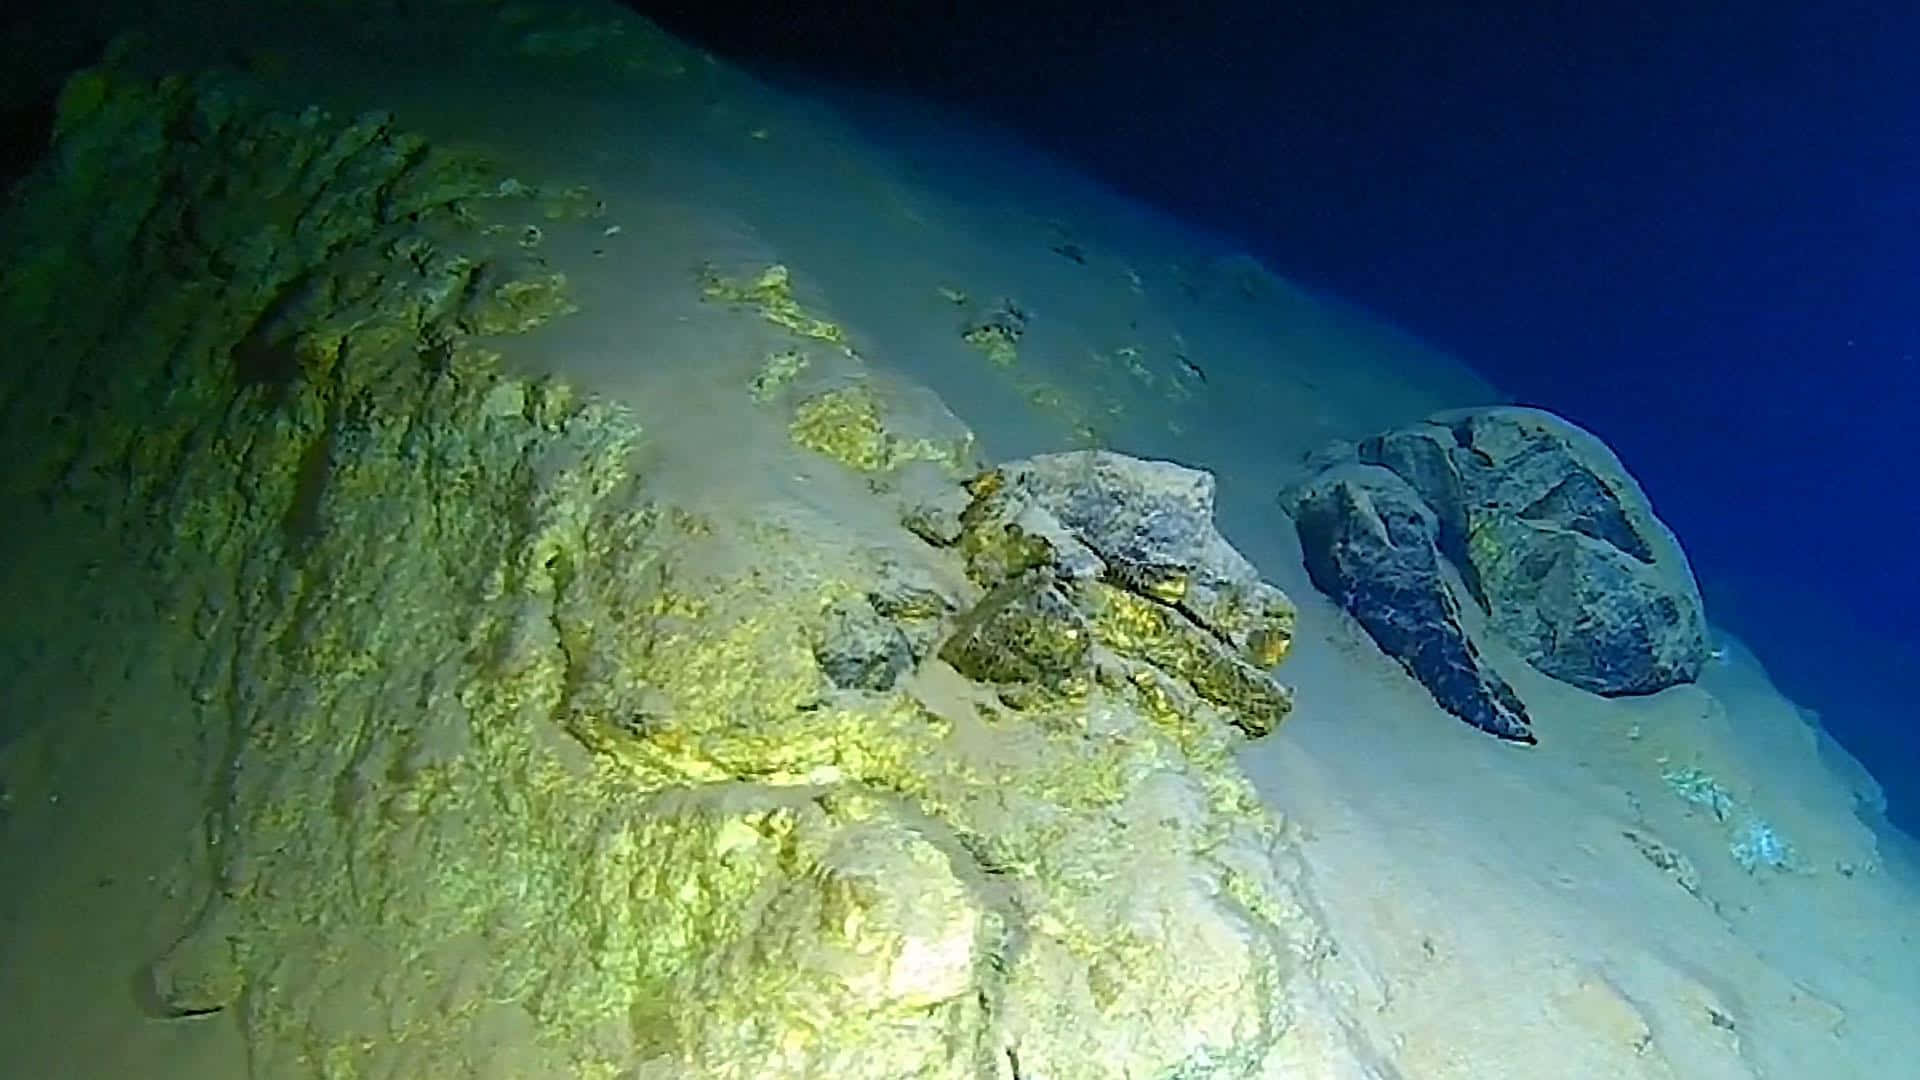 A Large Rock Is Sitting On The Bottom Of The Ocean